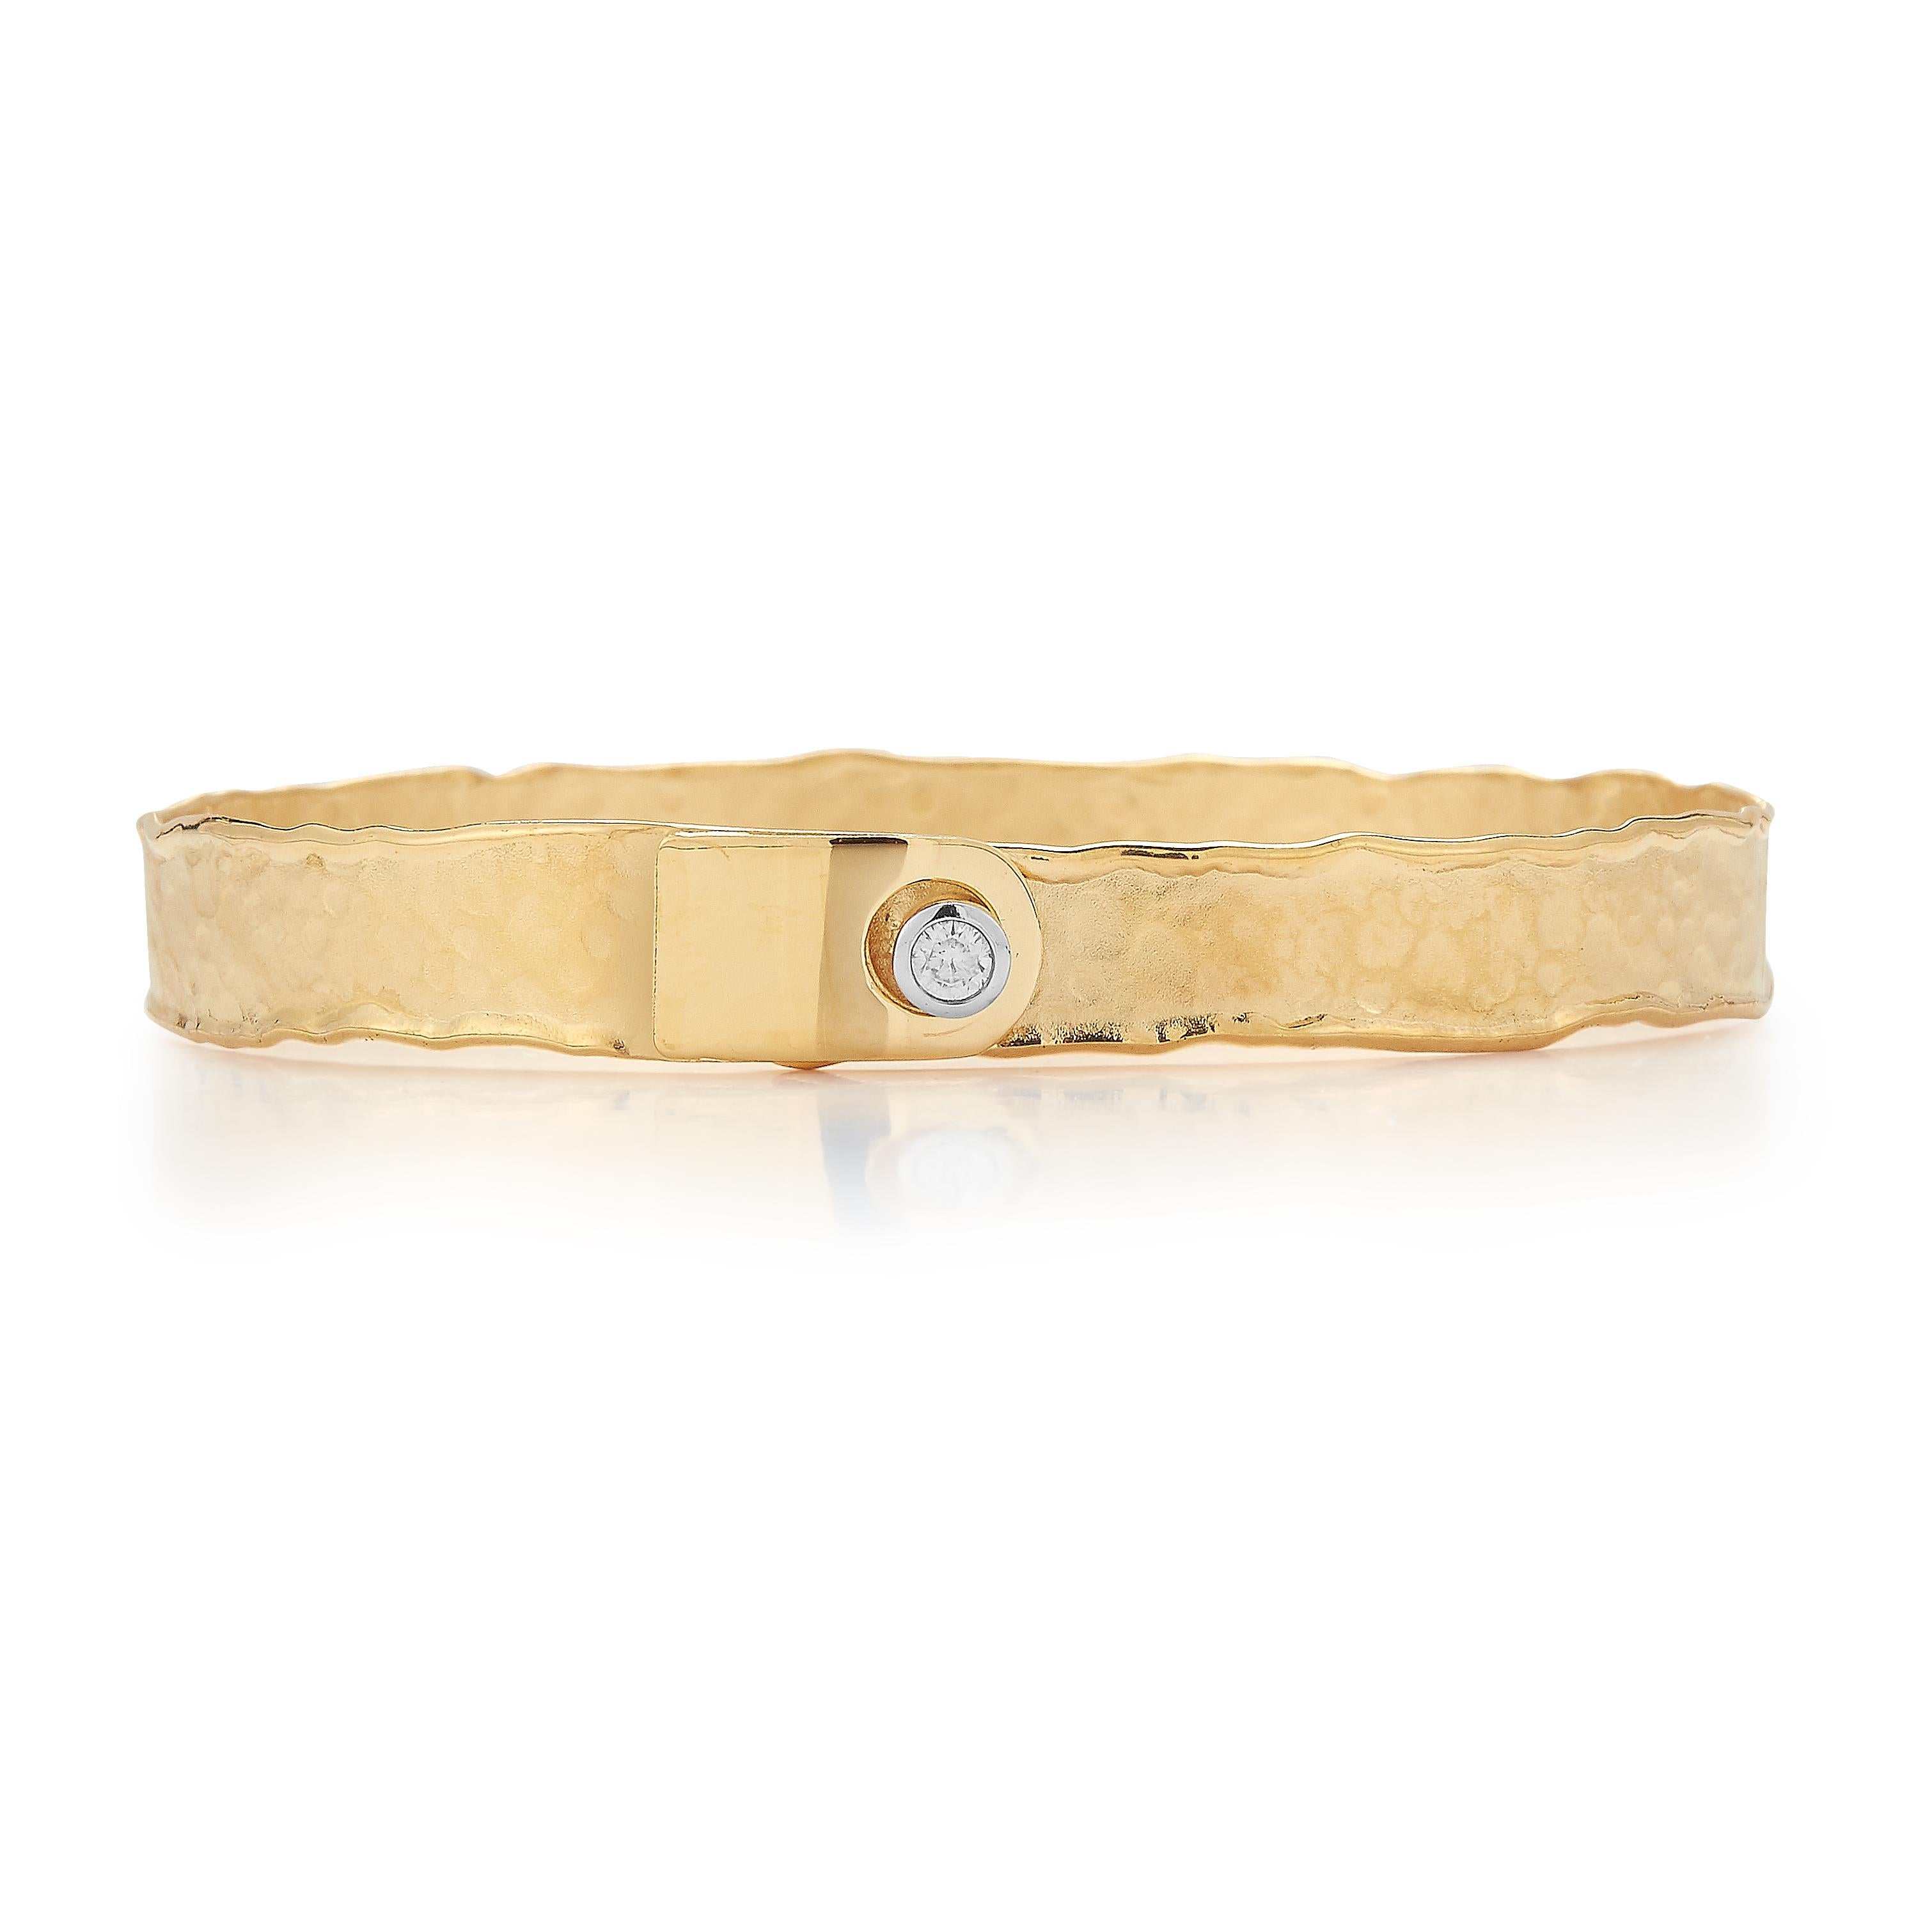 14 Karat Yellow Gold Hand-Crafted Matte and Hammer-Finished Scallop Edged 8mm Cuff Bracelet, Set with a 0.10 Carat Diamond with a Buckle Closure.
